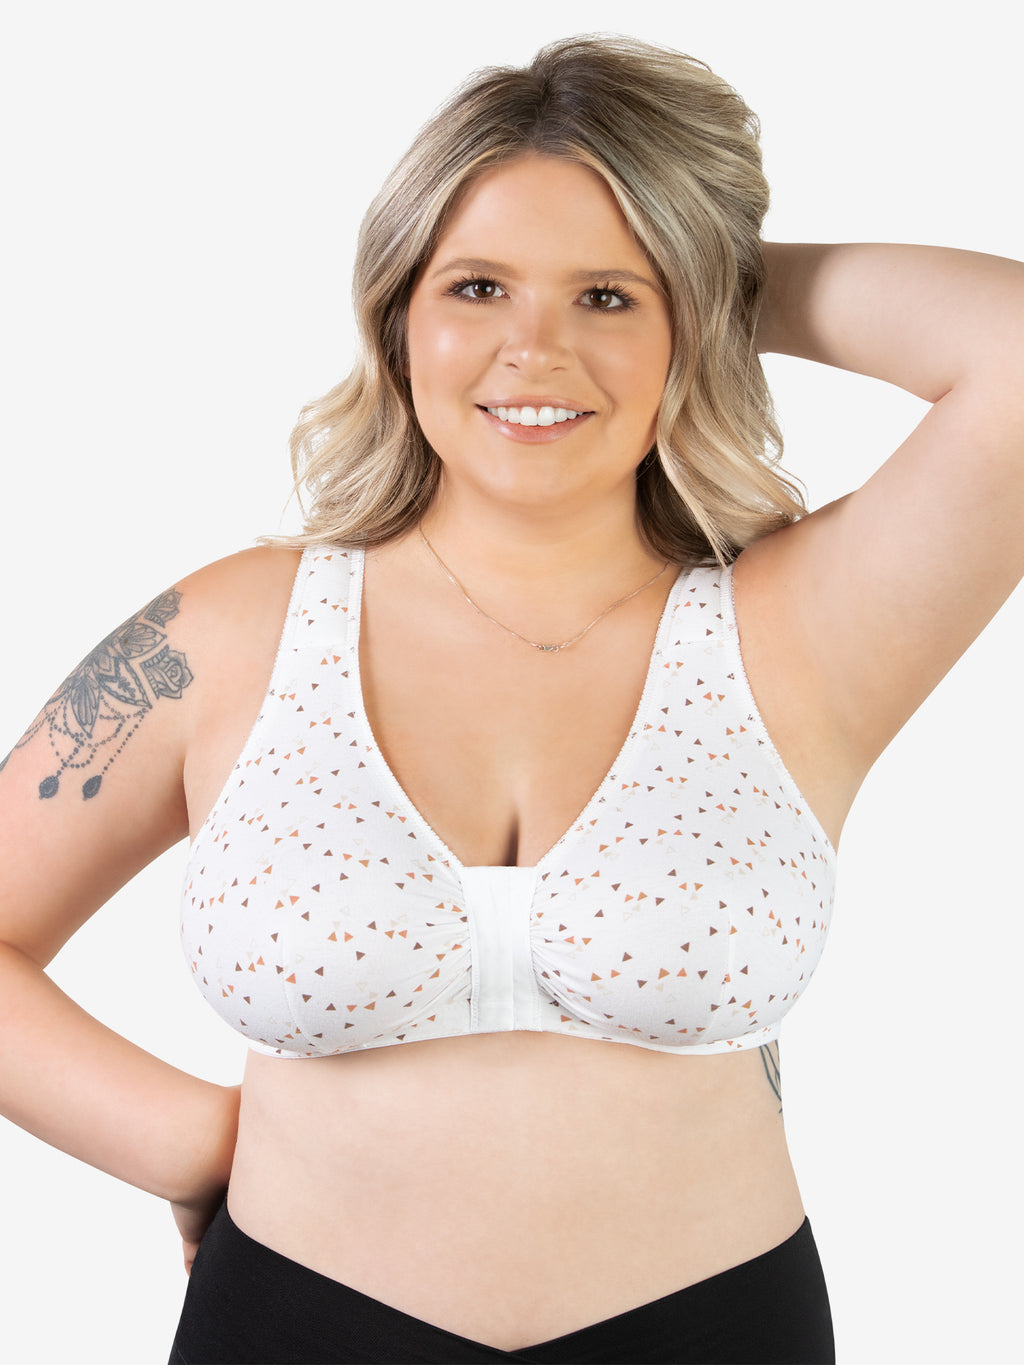 A New Bra from Leading Lady and a New Attitude – mama goes bam